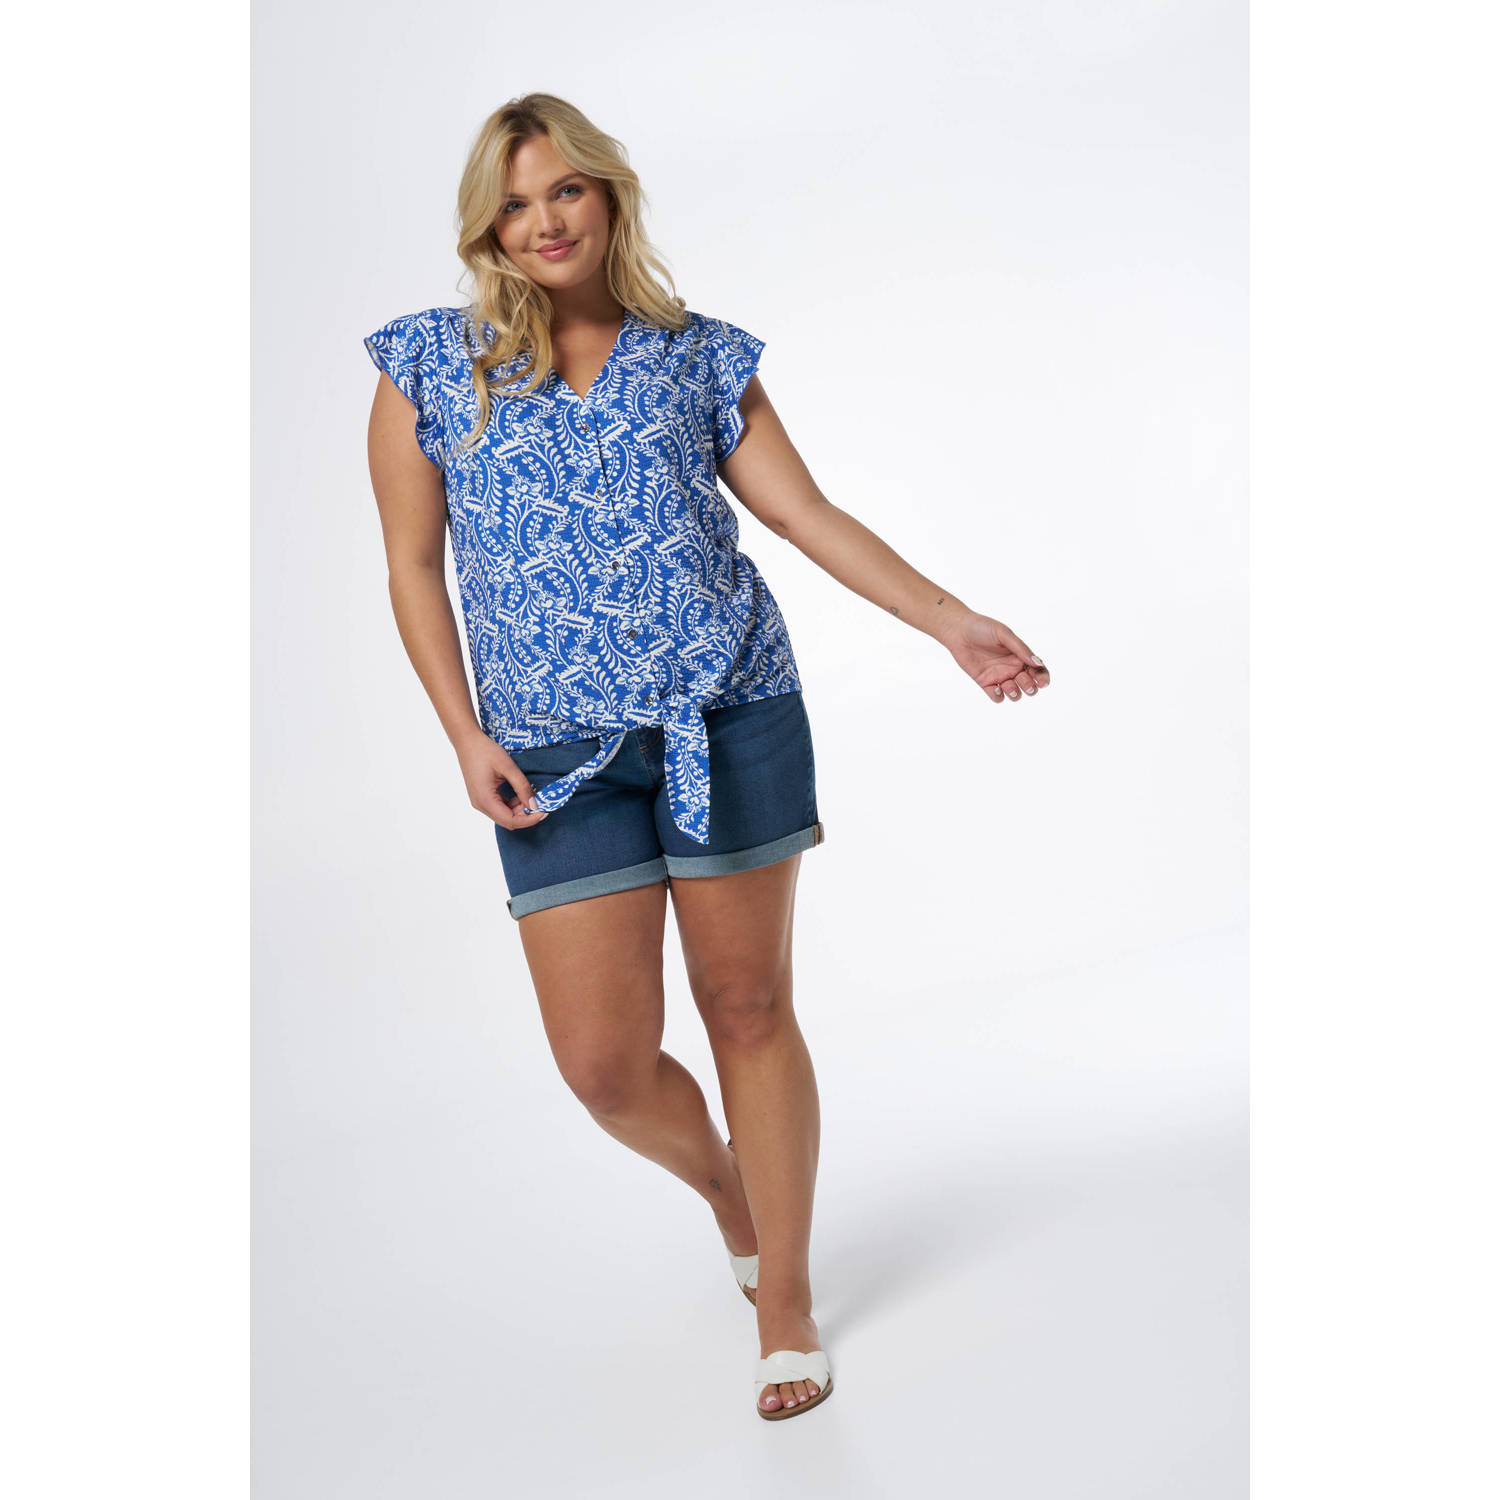 MS Mode blouse met all over print en ruches blauw wit